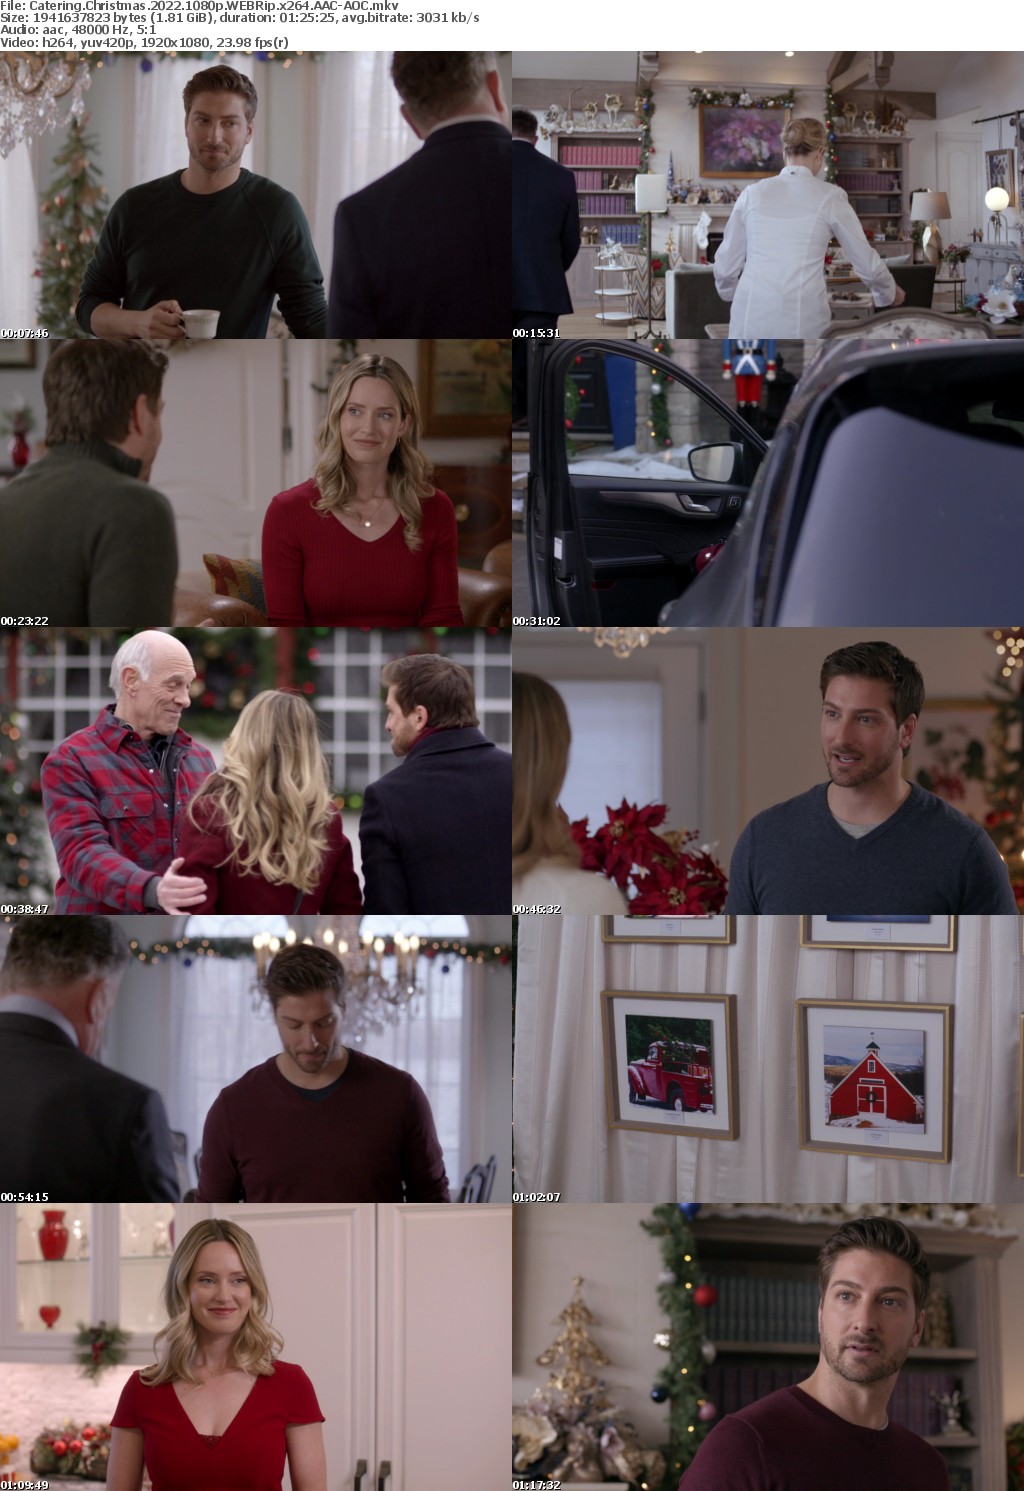 Catering Christmas 2022 1080p WEBRip x264 AAC-AOC